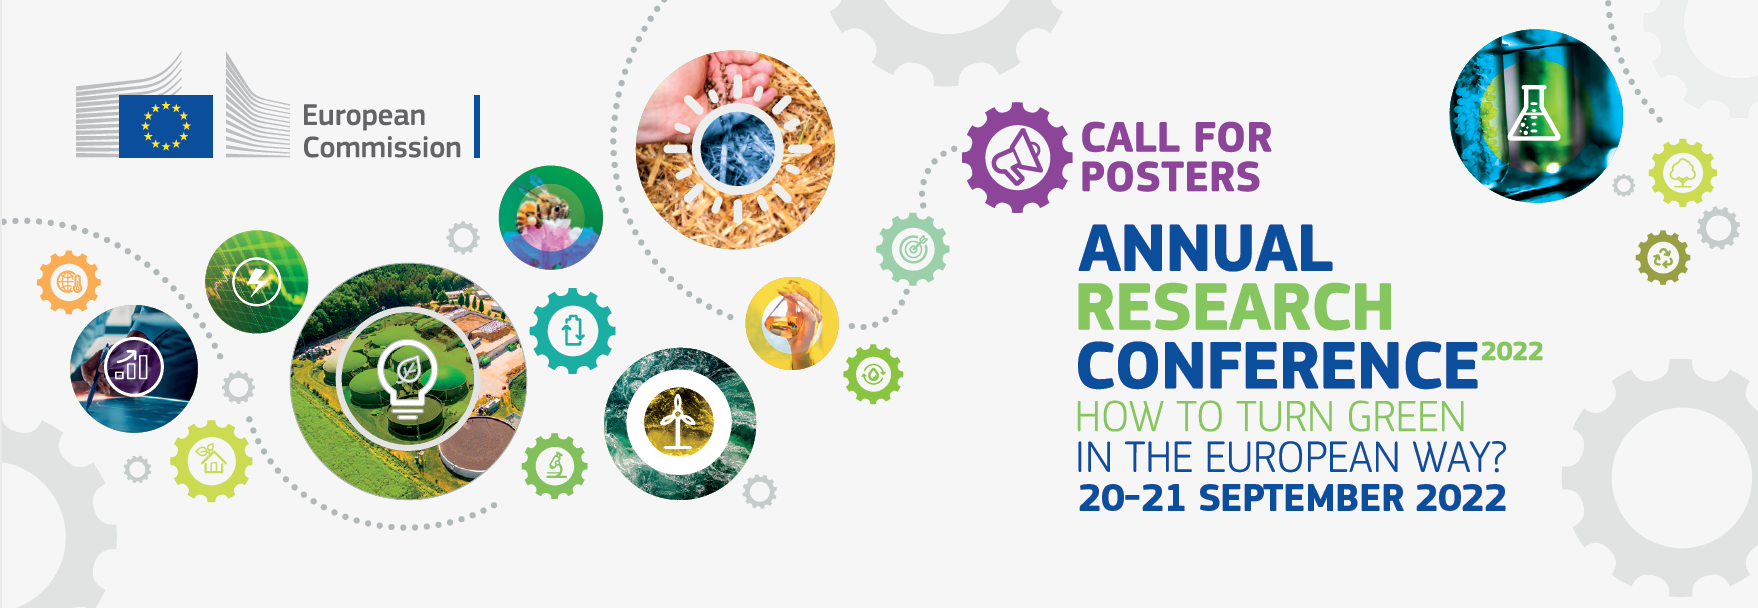 Call for posters: Annual Research Conference 2022